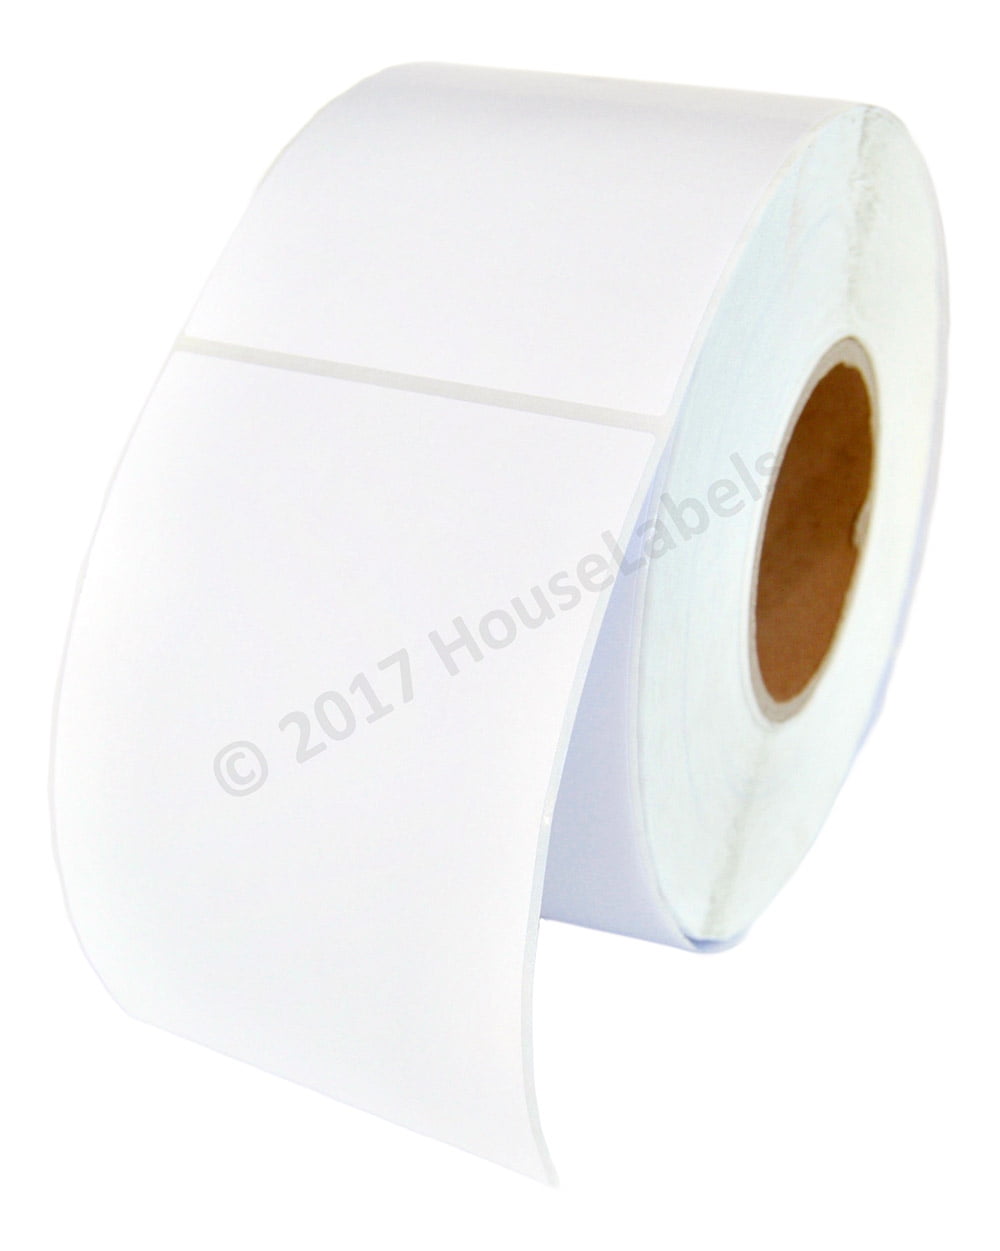 4 rolls 1000 4x6" Direct Thermal Shipping Labels Self-Adhesive Roll Zebra Eltron 